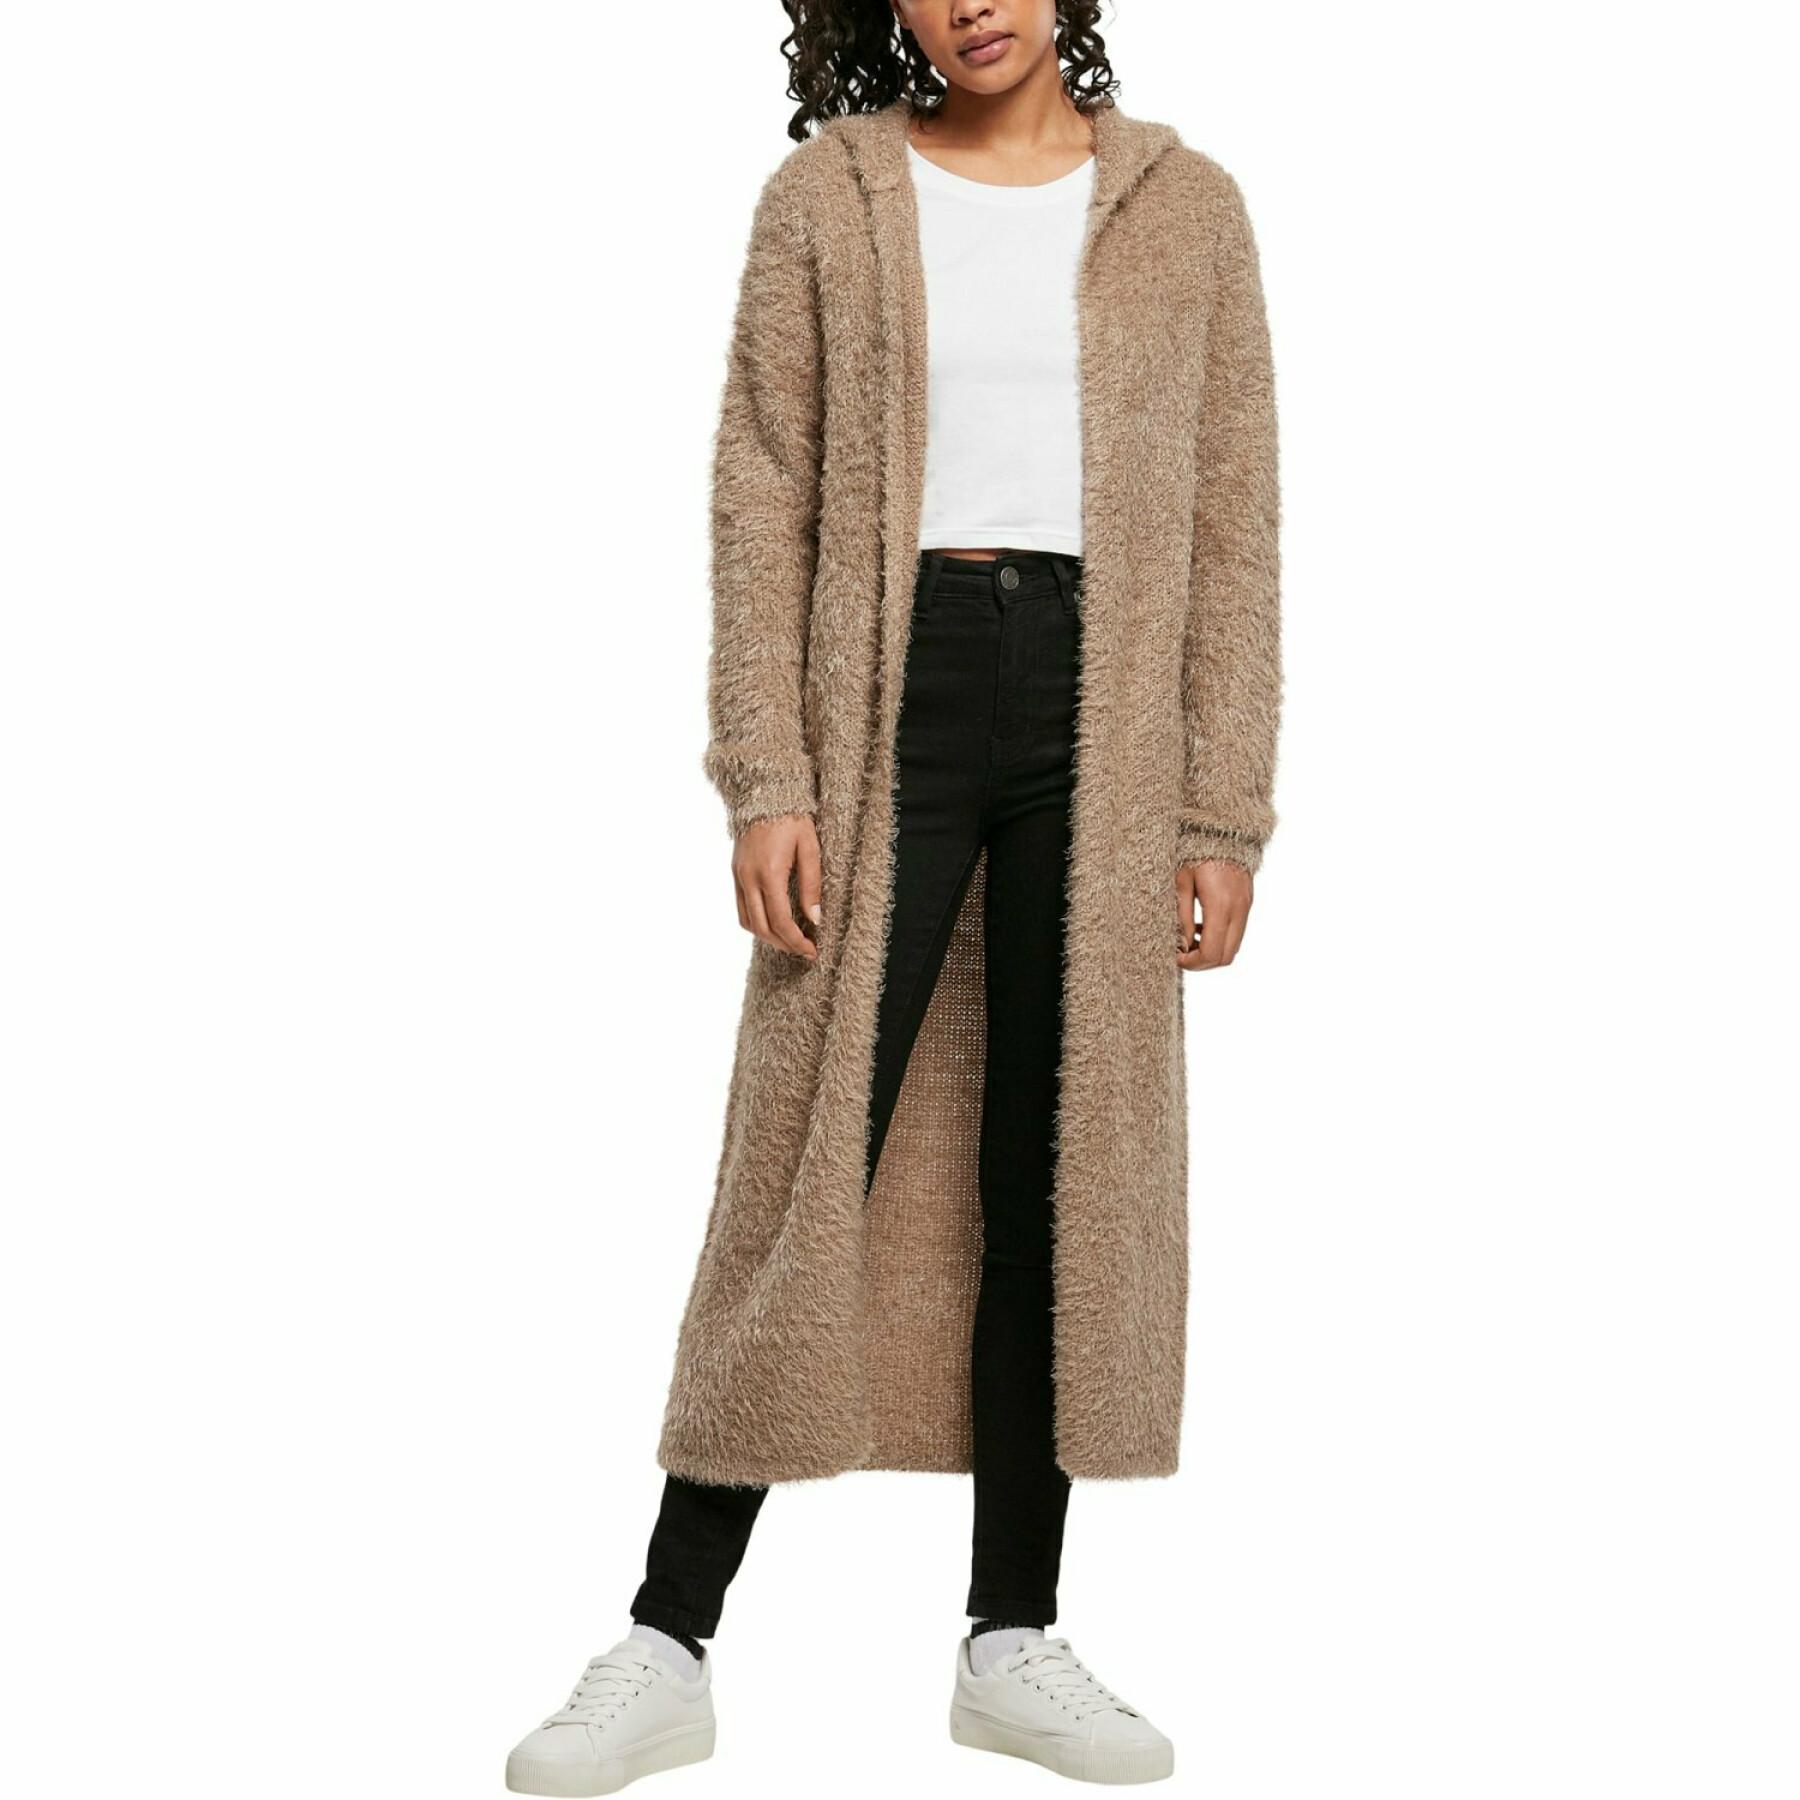 Cardigan long femme Urban Classics hooded feather-grandes tailles